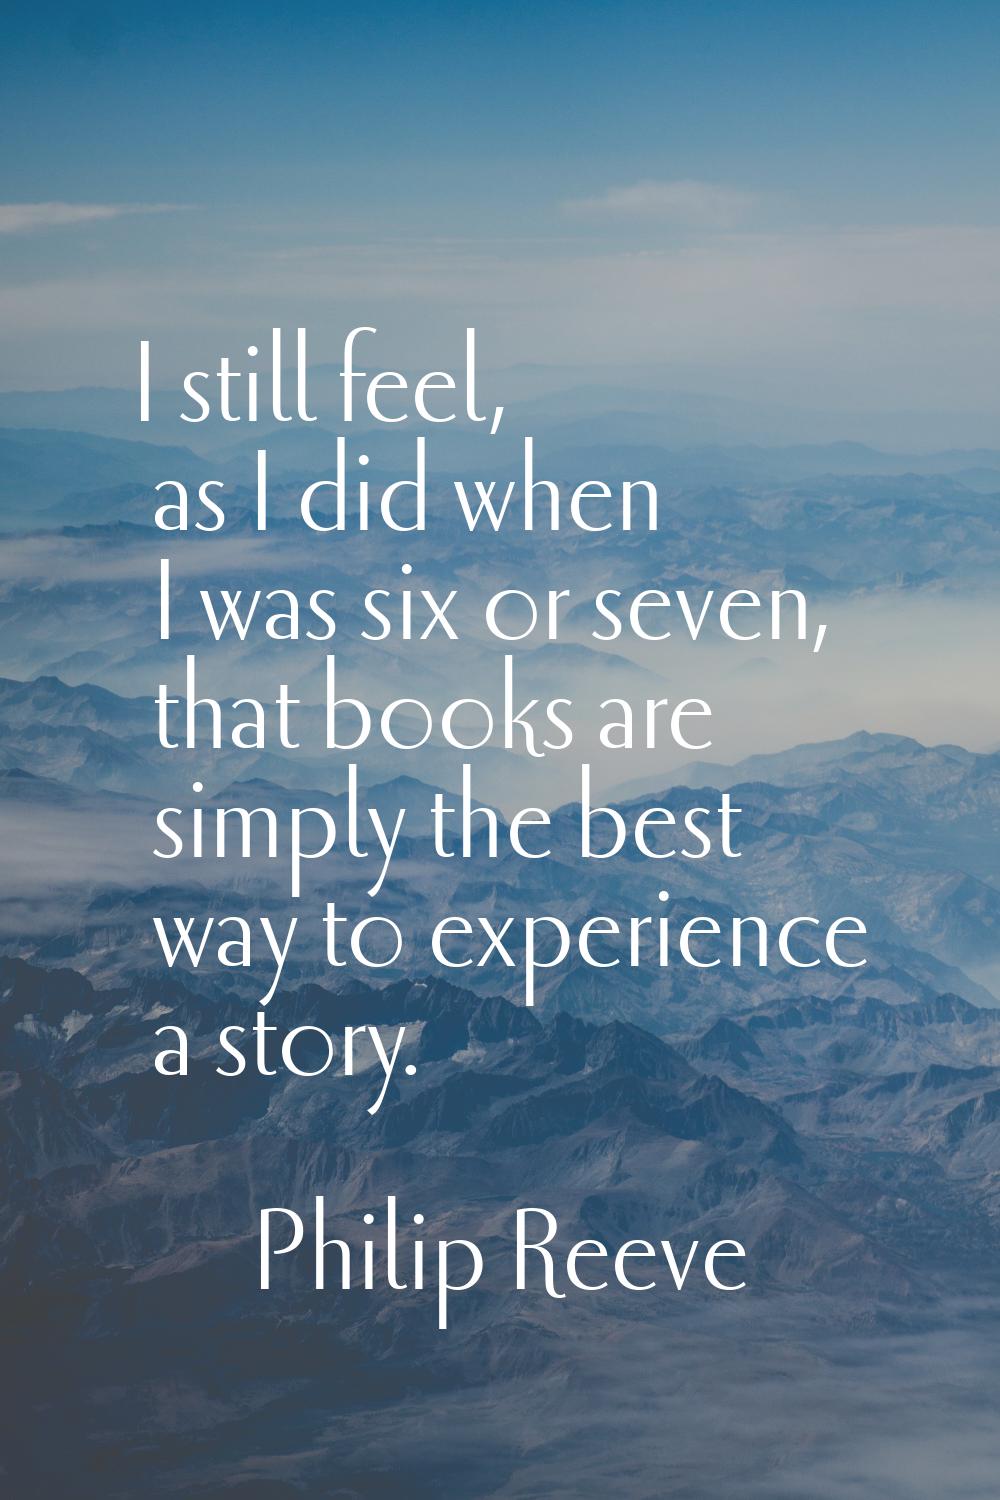 I still feel, as I did when I was six or seven, that books are simply the best way to experience a 